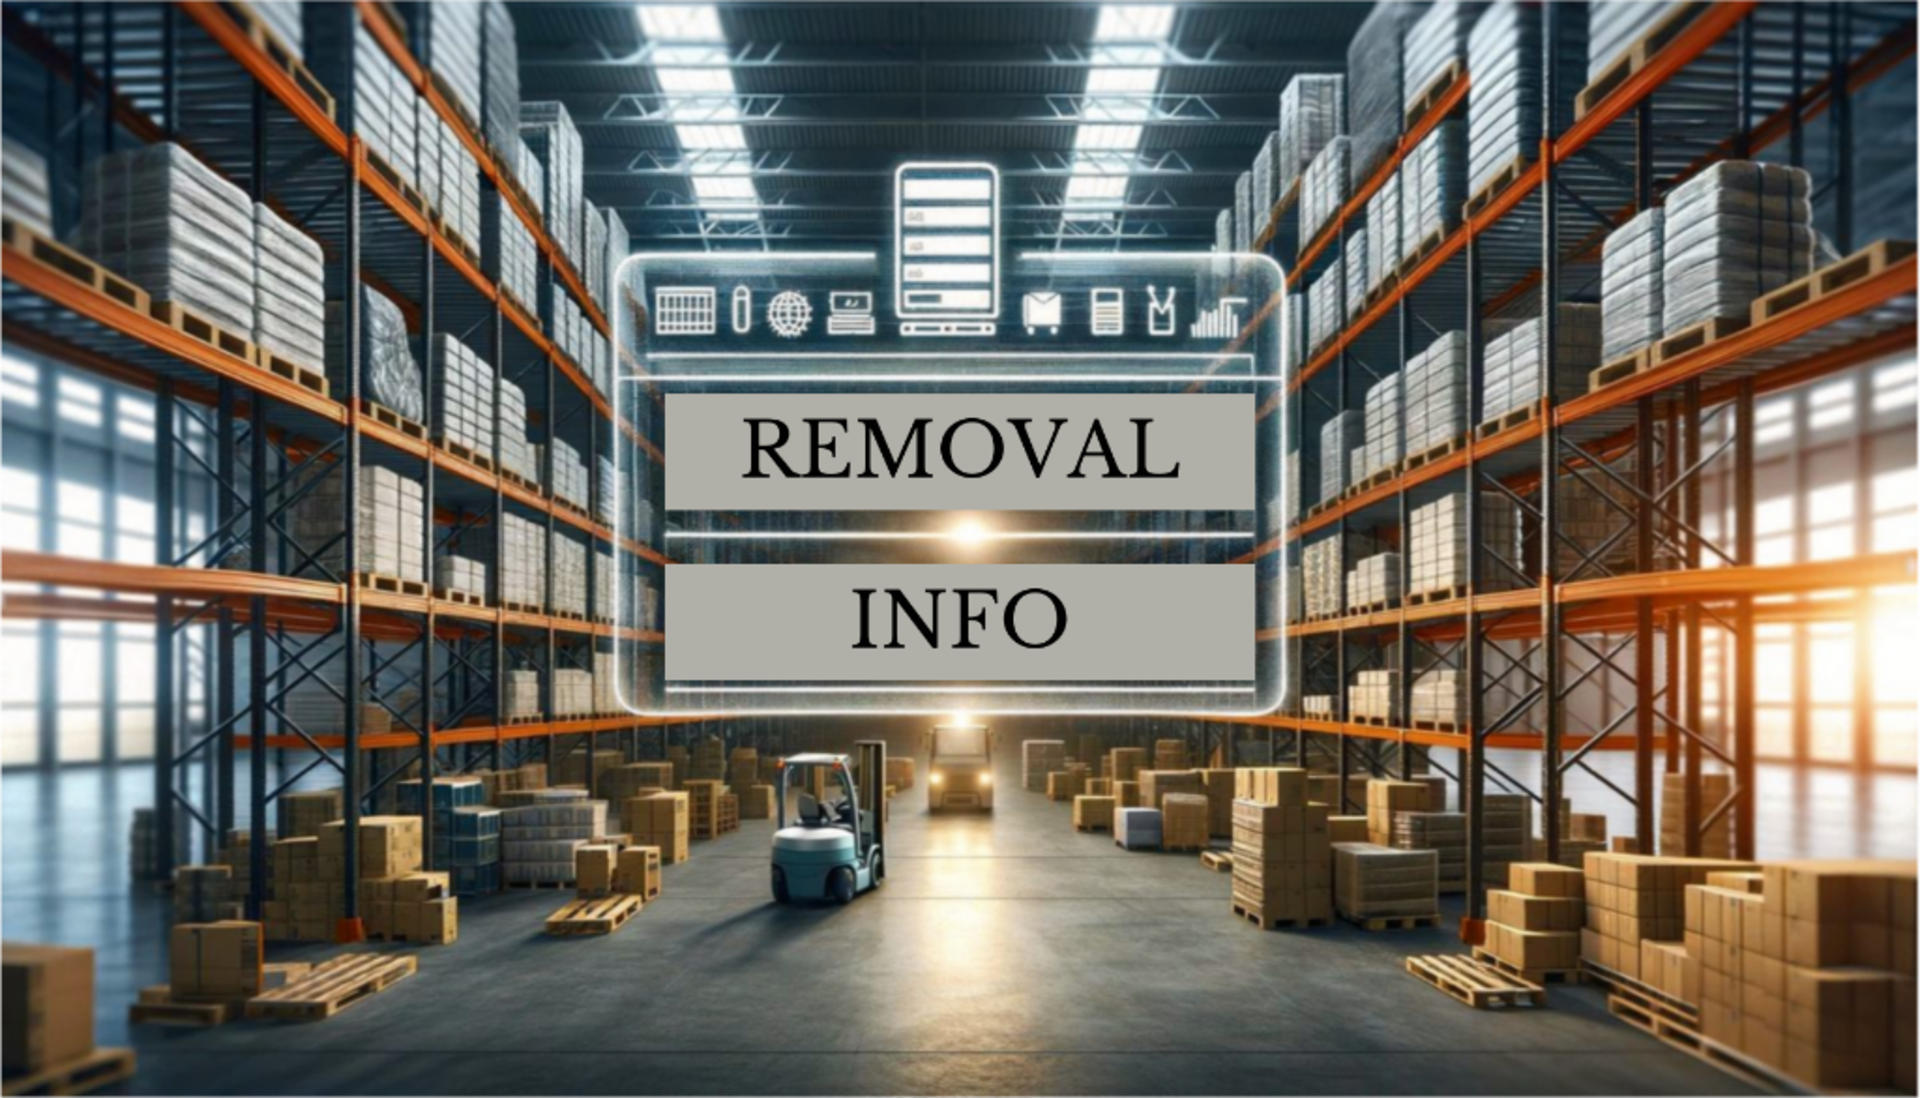 REMOVAL DETAILS: Please note that the Freight on Board (FOB) of auction lots may vary and will appea